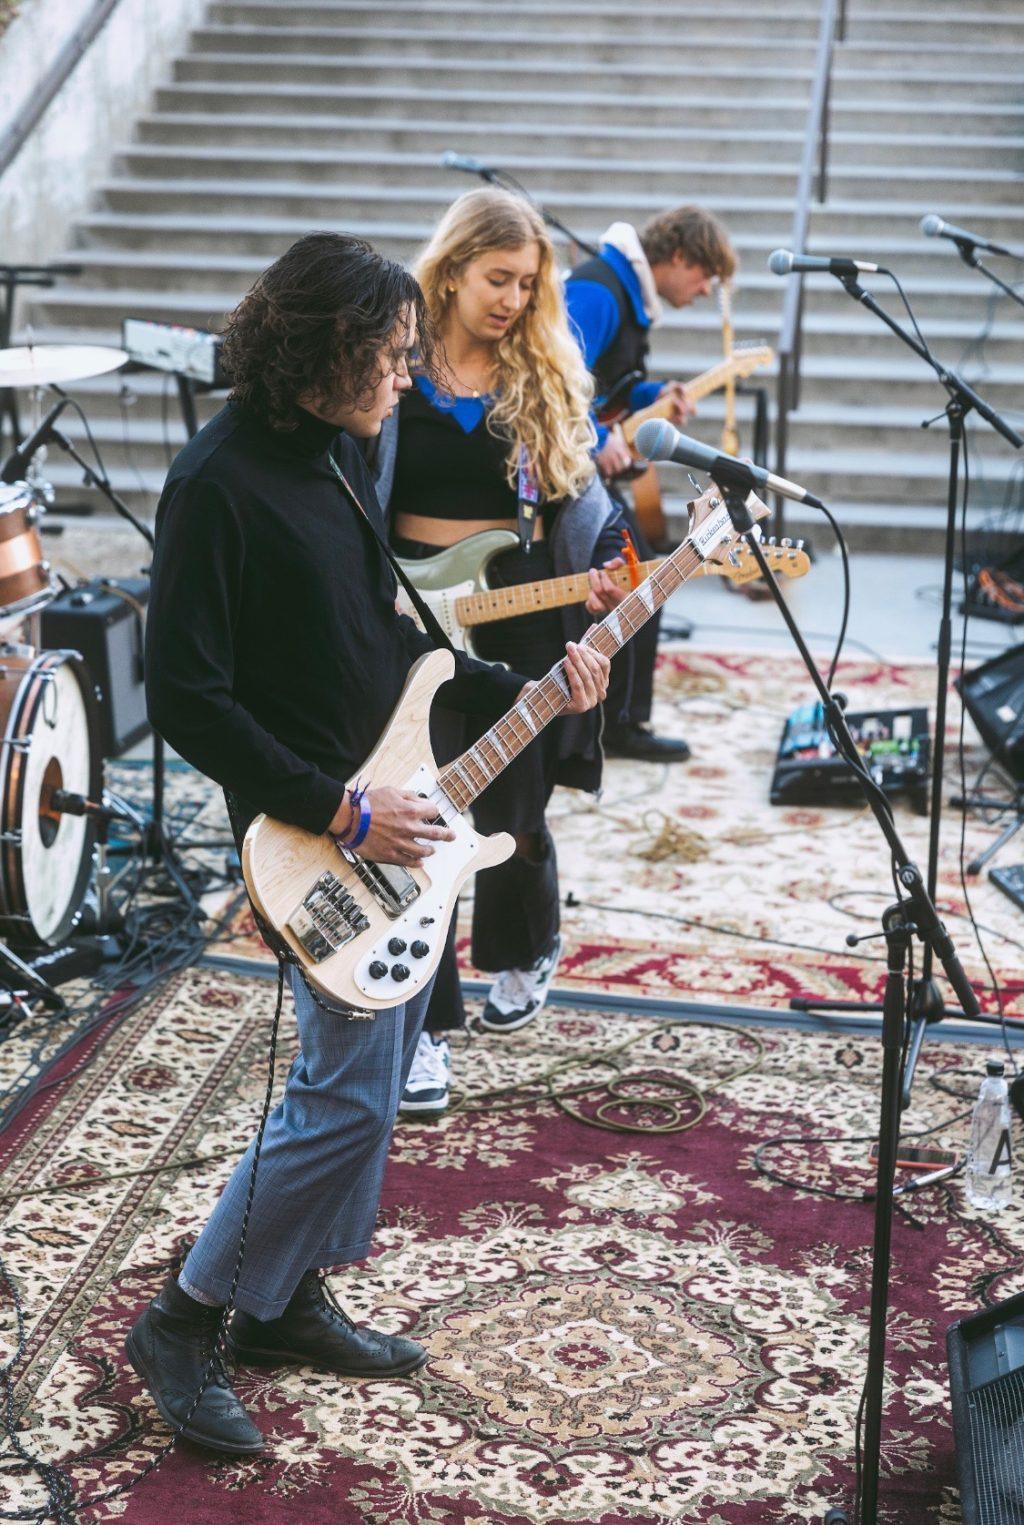 The band plays in the Amphitheater on Pepperdine's Malibu campus March 19. They performed a handful of covers along with their two original songs.